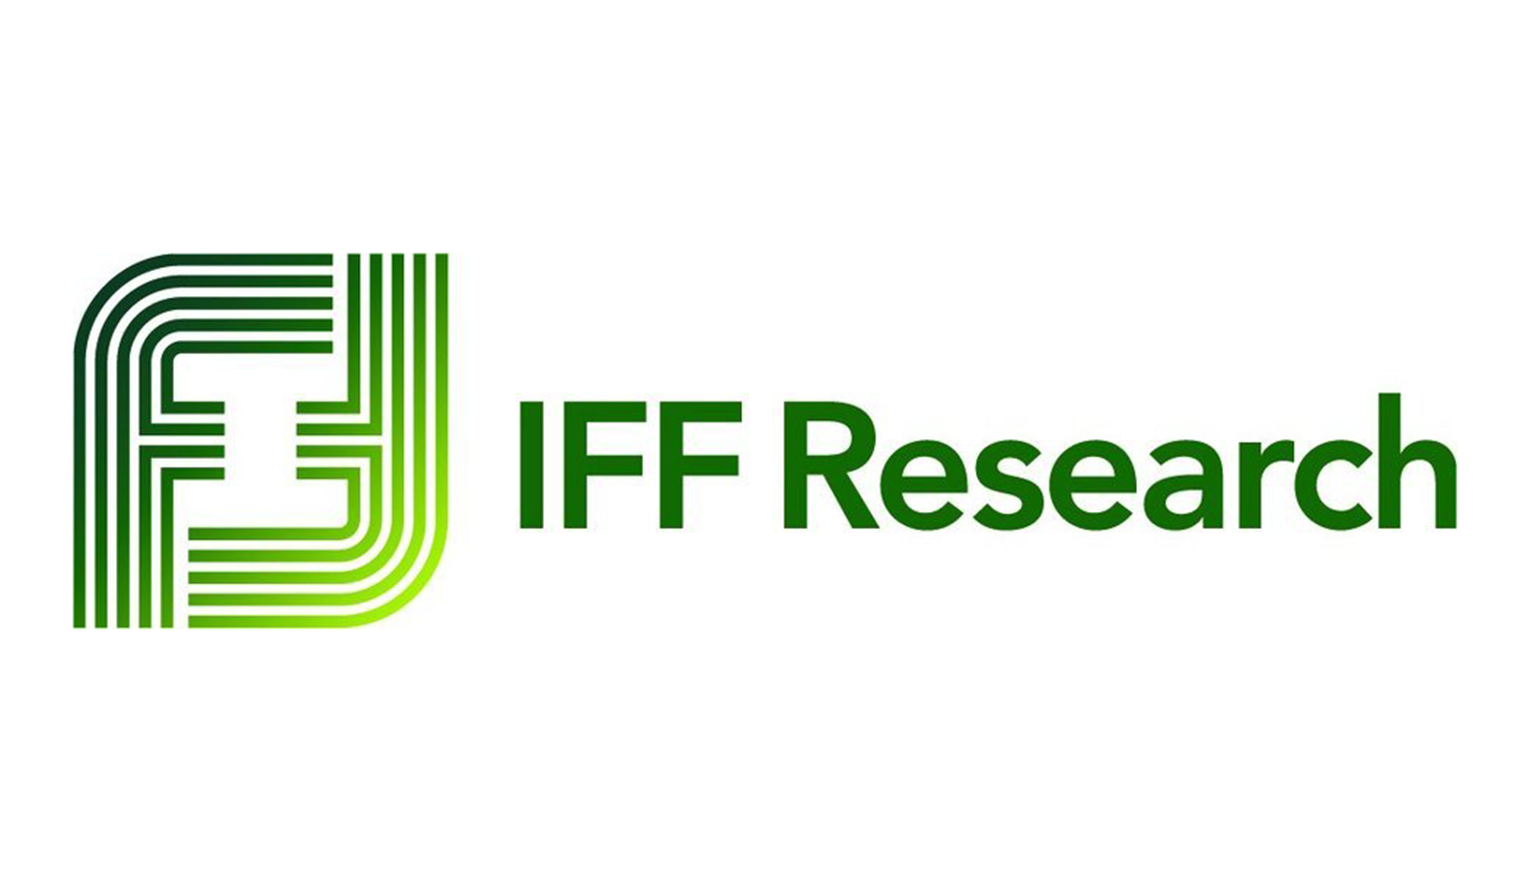 Who is IFF?